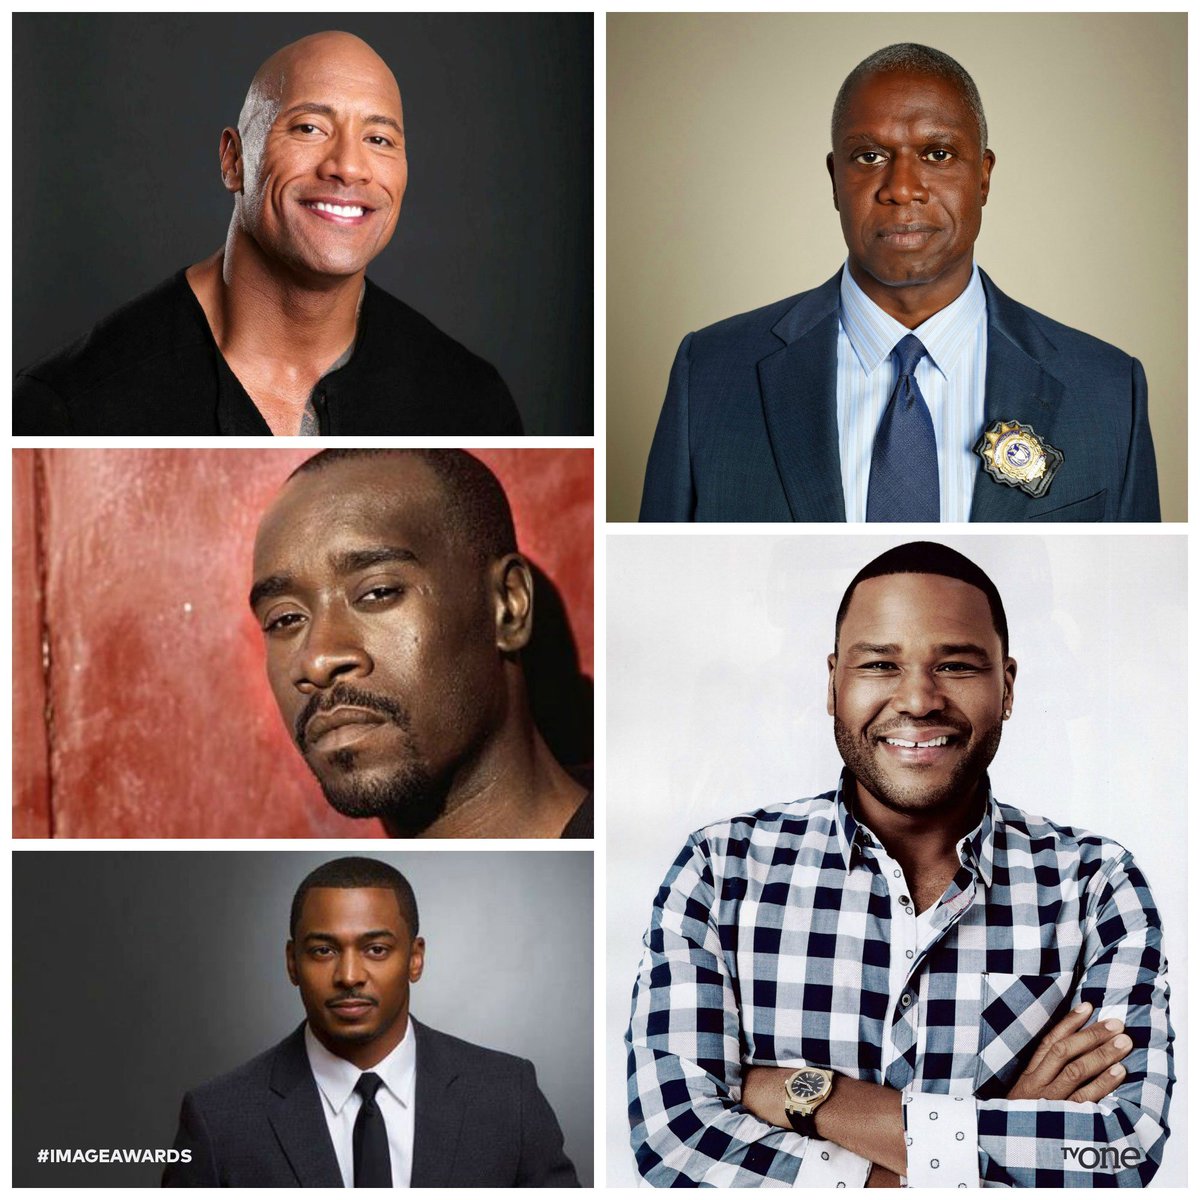 RT @tvonetv: .@IamDonCheadle @TheRock @DoubleRLee #AndreBraugher & @AnthonyAnderson are nominated for Outstanding Actor (Comedy)! https://t…